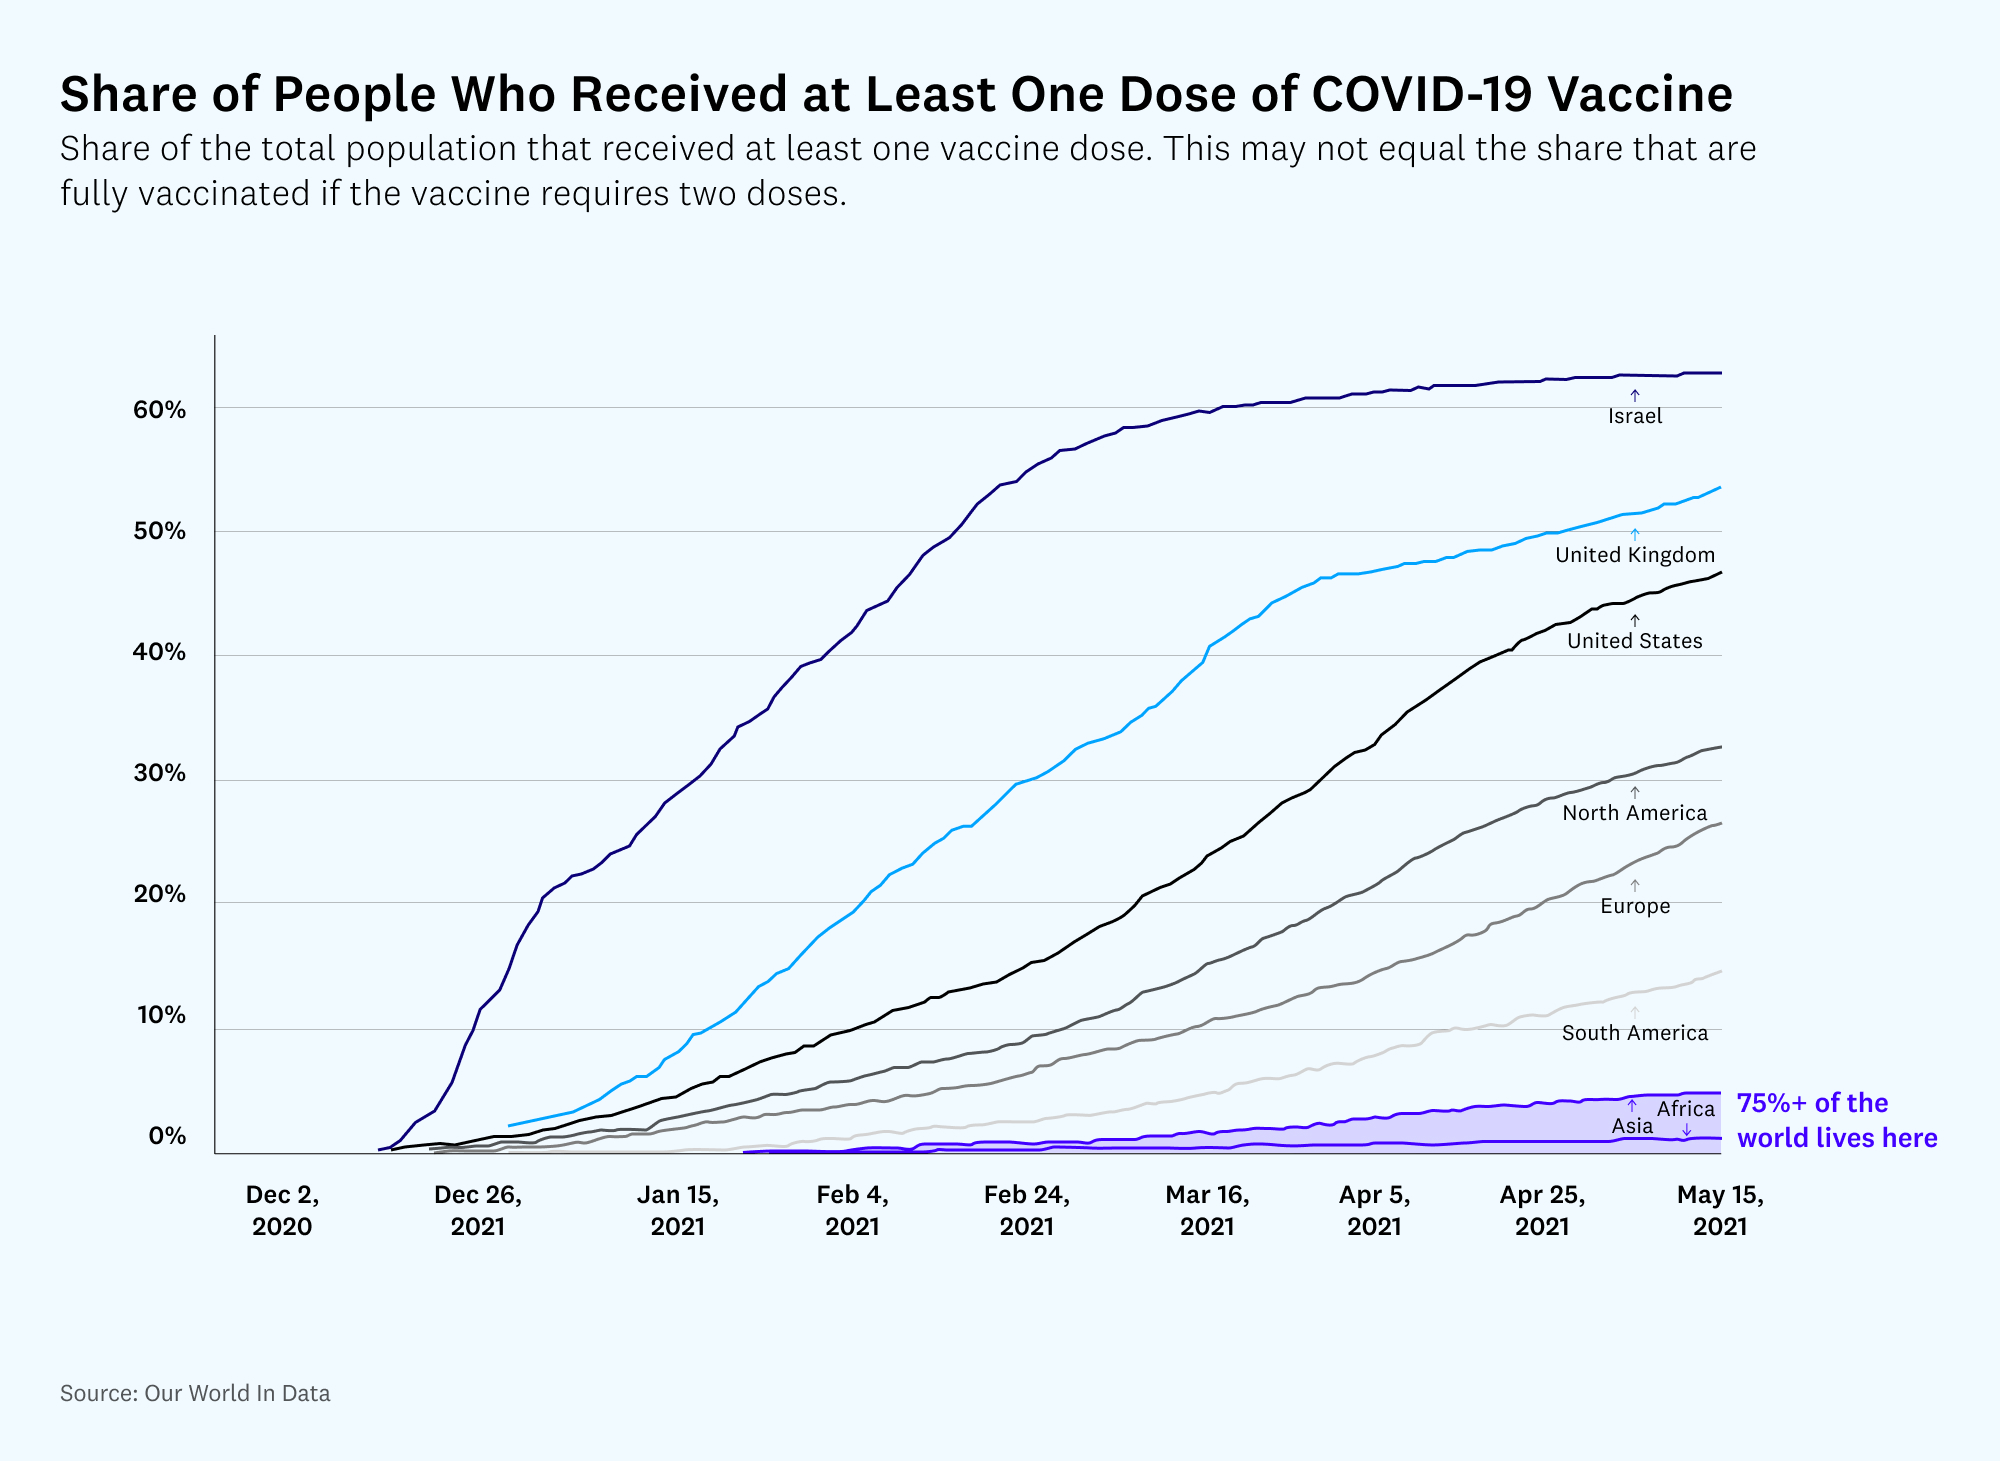 Share of People Who Received One Dose of Vaccine